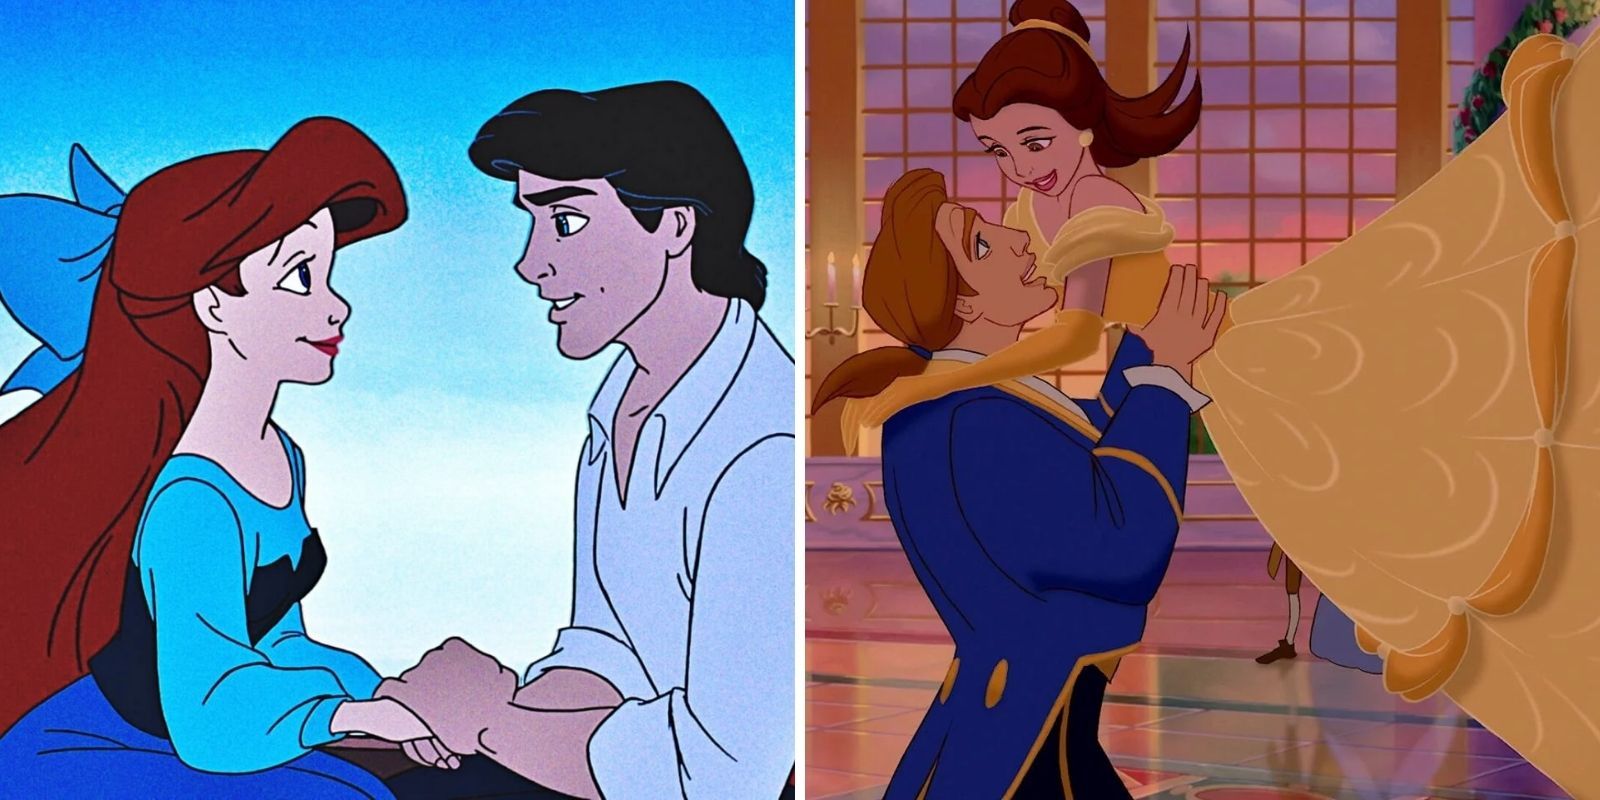 Beauty & The Beast & The Little Mermaid Exist In The Same Timeline Theory